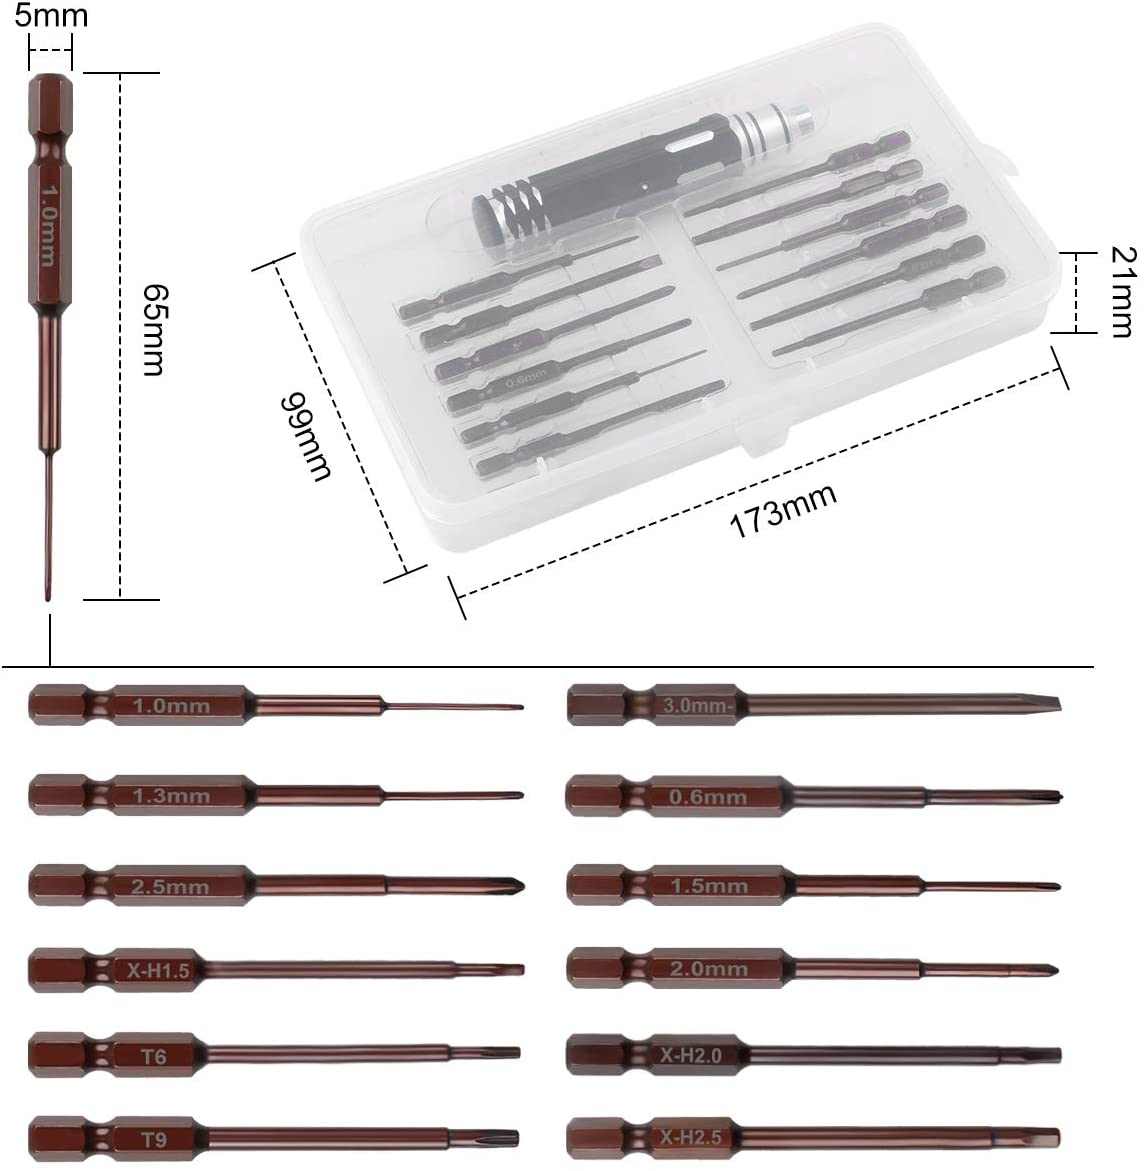 12 in 1 Multifunction Hex Screwdriver Set For RC Models